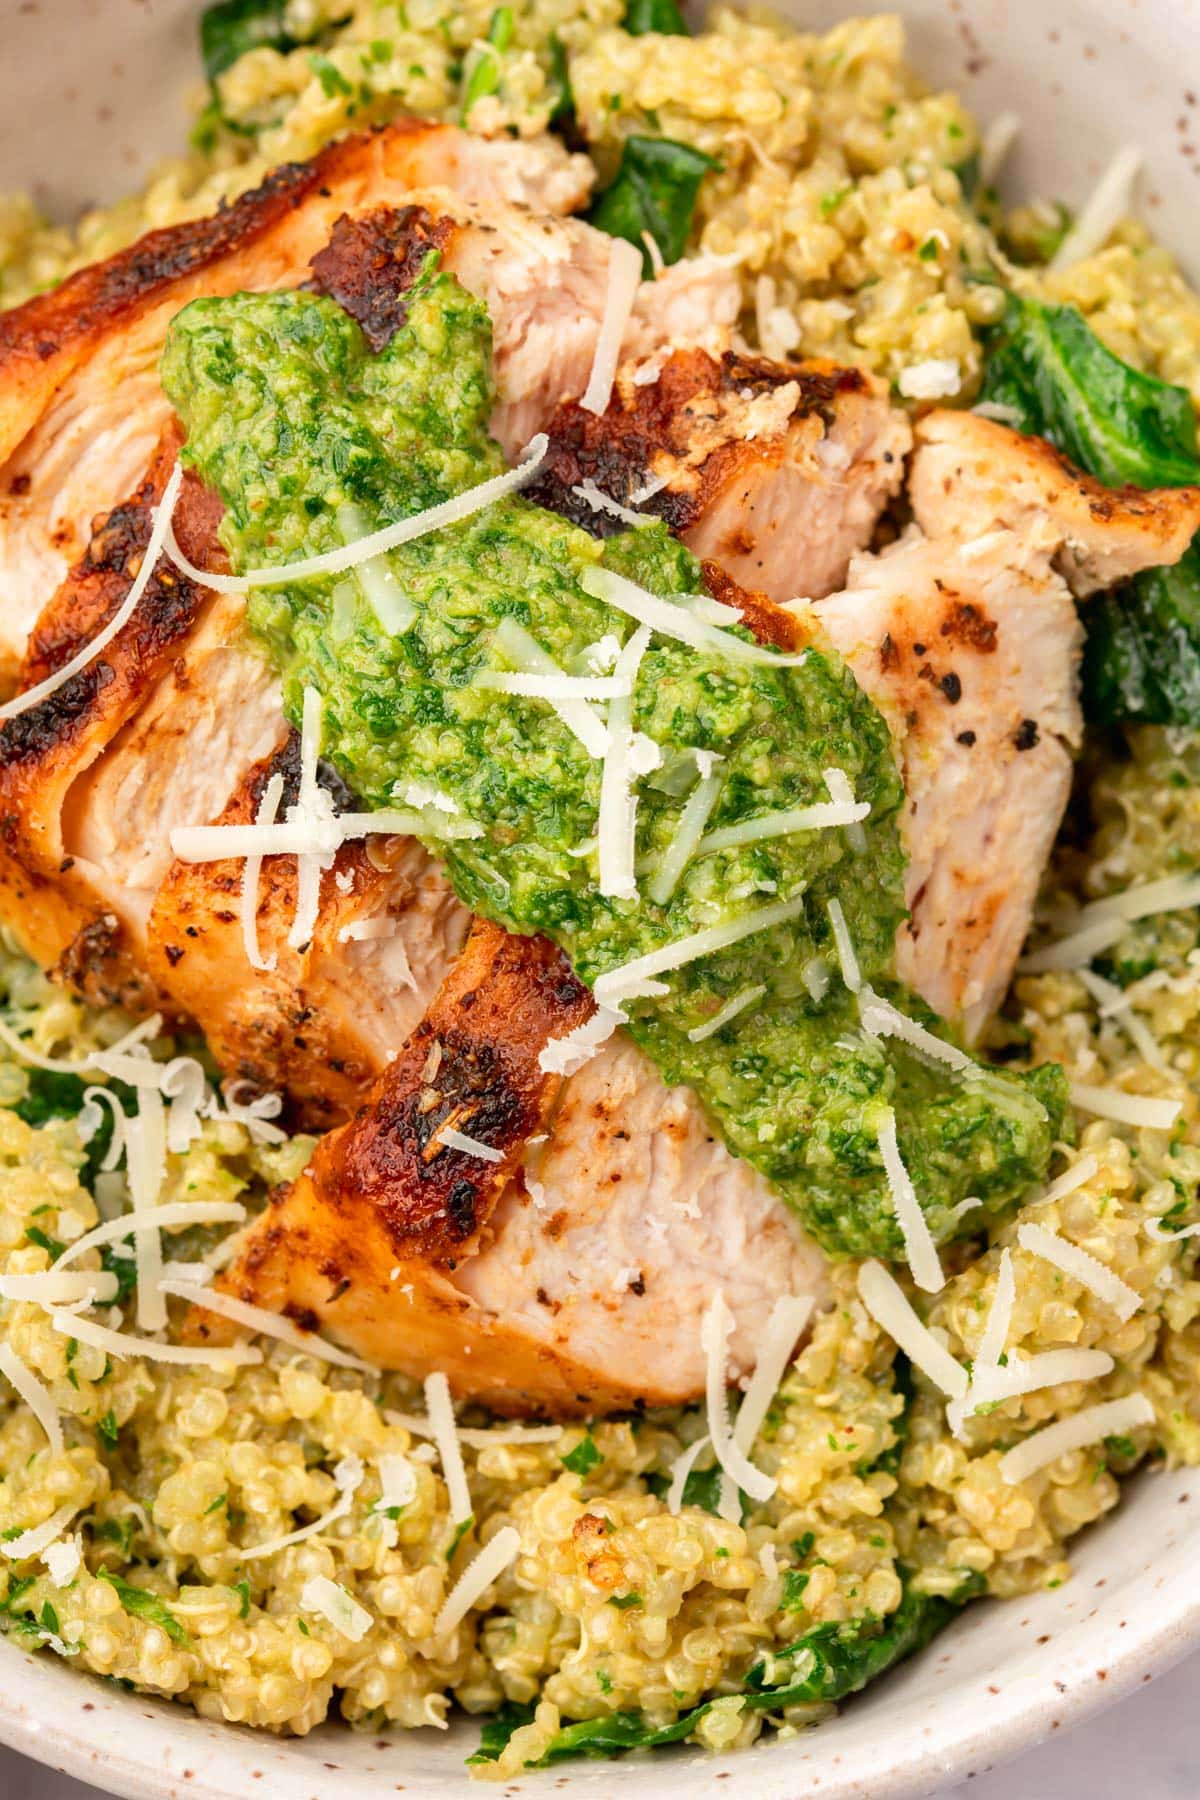 A close up of a bowl of quinoa mixed with spinach and topped with sliced chicken breast, parsley pesto and shredded parmesan cheese.